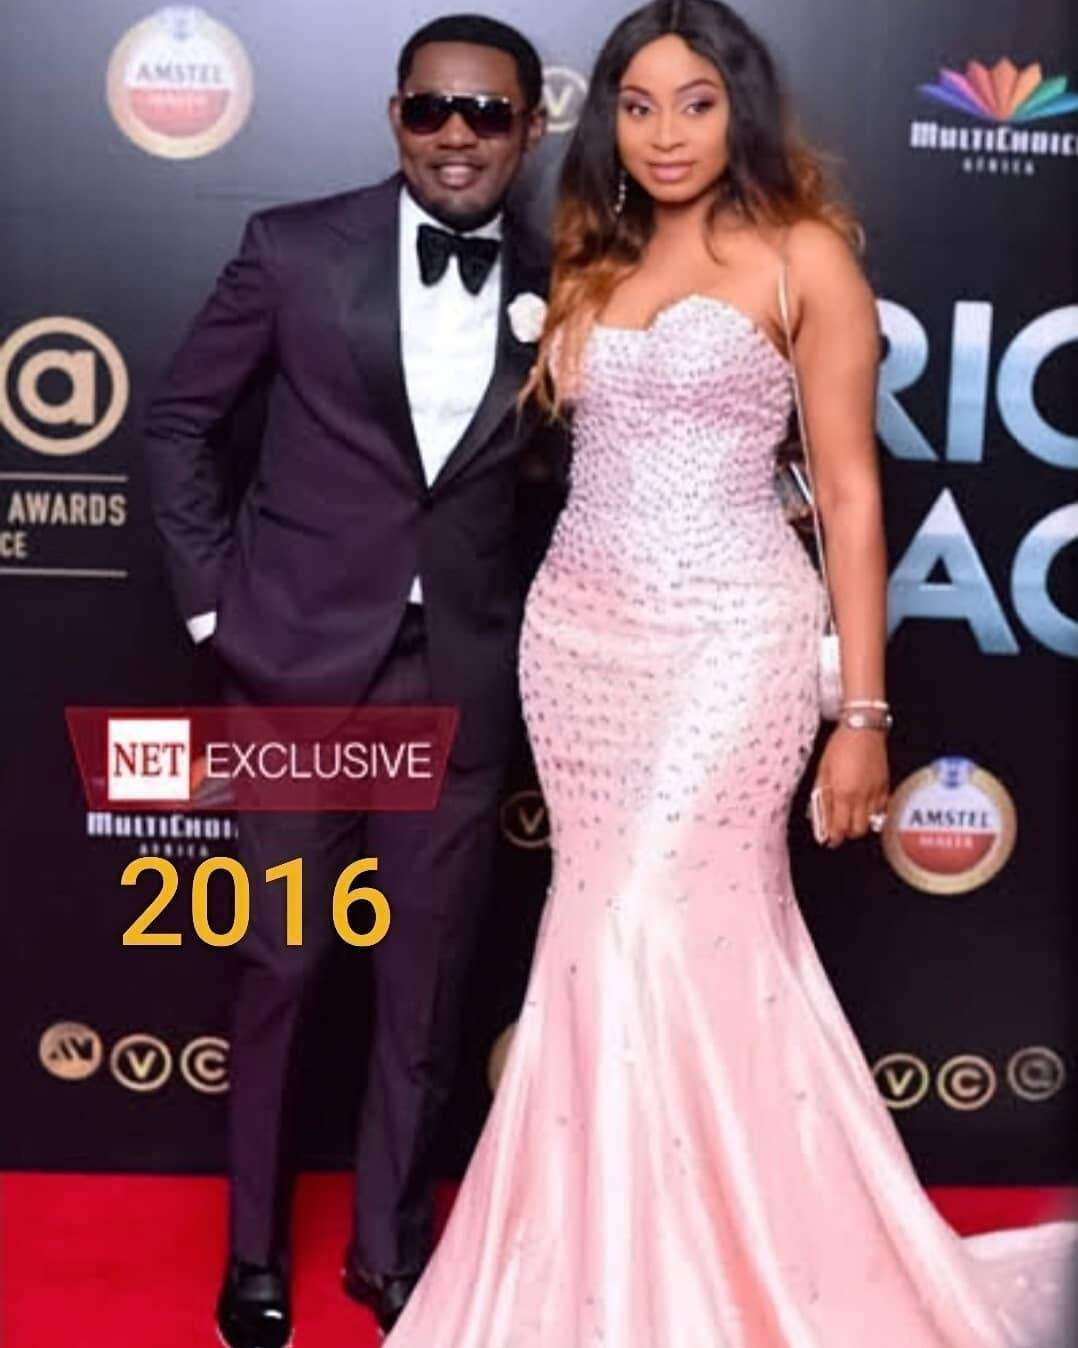 AY shares old photos of his wife, Mabel as he counters allegation of plastic surgery